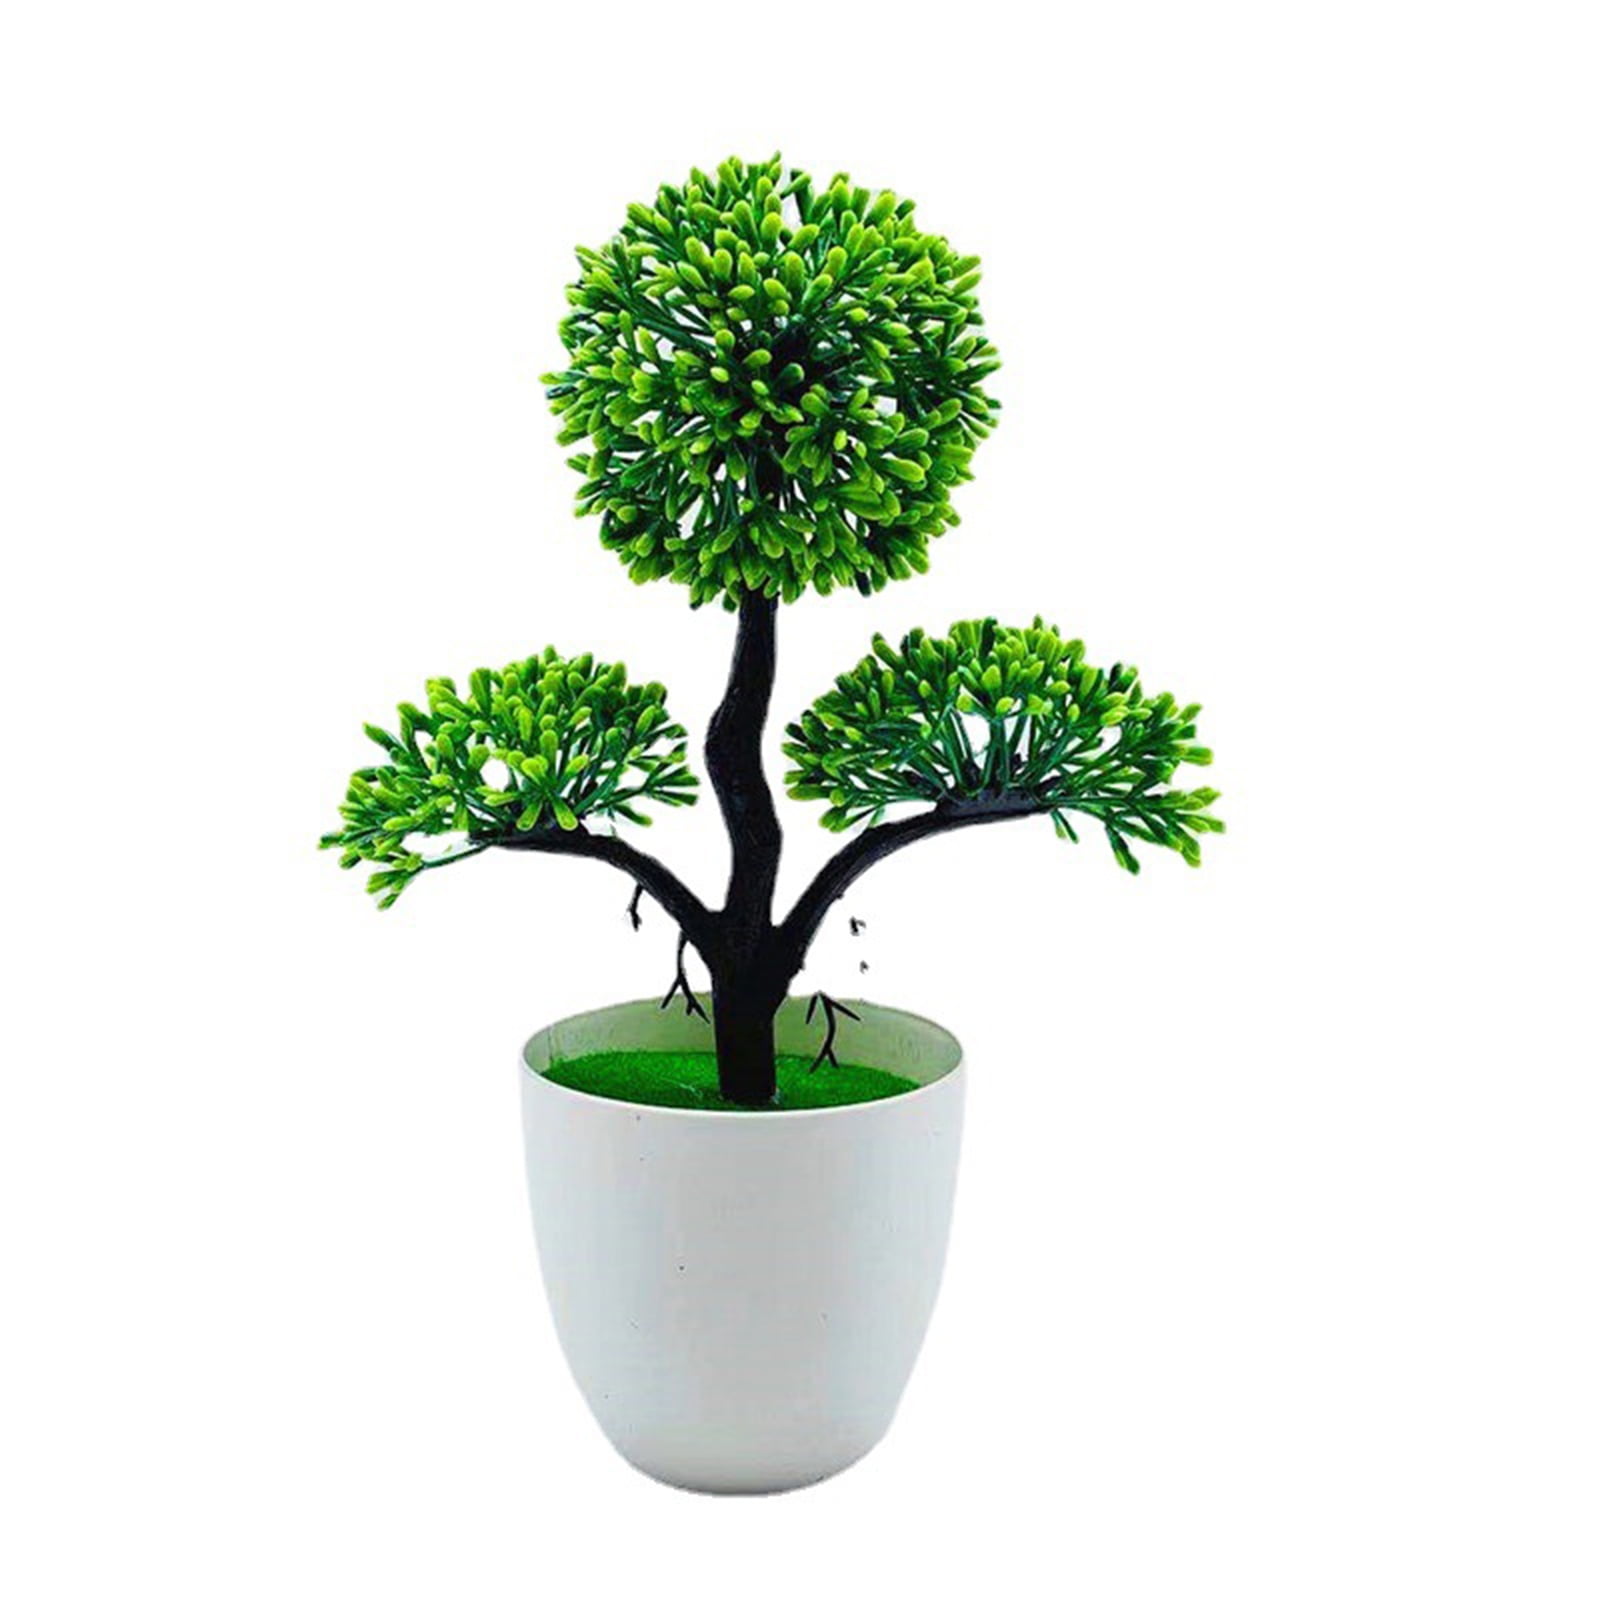 Artificial Fake Milan Grass Plant Bonsai Potted Office Home Window Decoration LP 